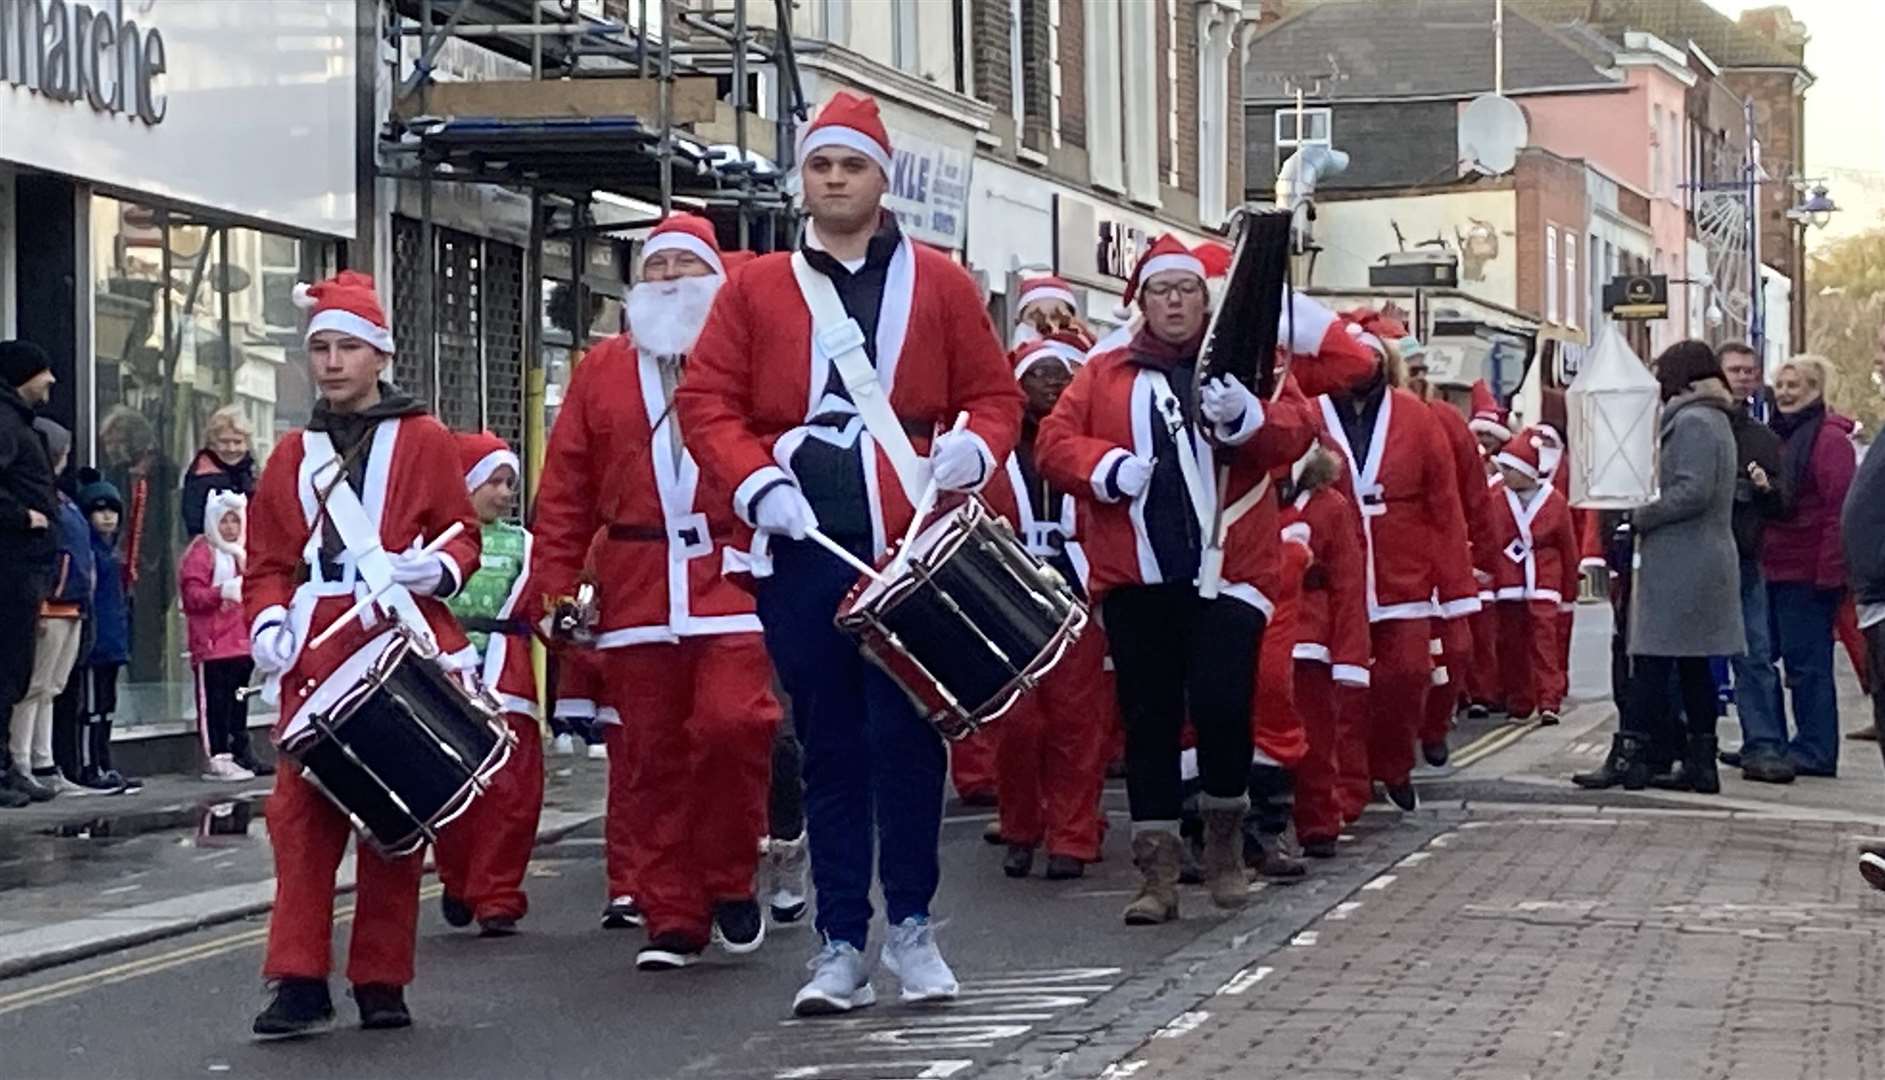 The Sheppey Sea Cadets Band led a 'sleigh' of Santas thanks to Minster-on-Sea Rotary Club